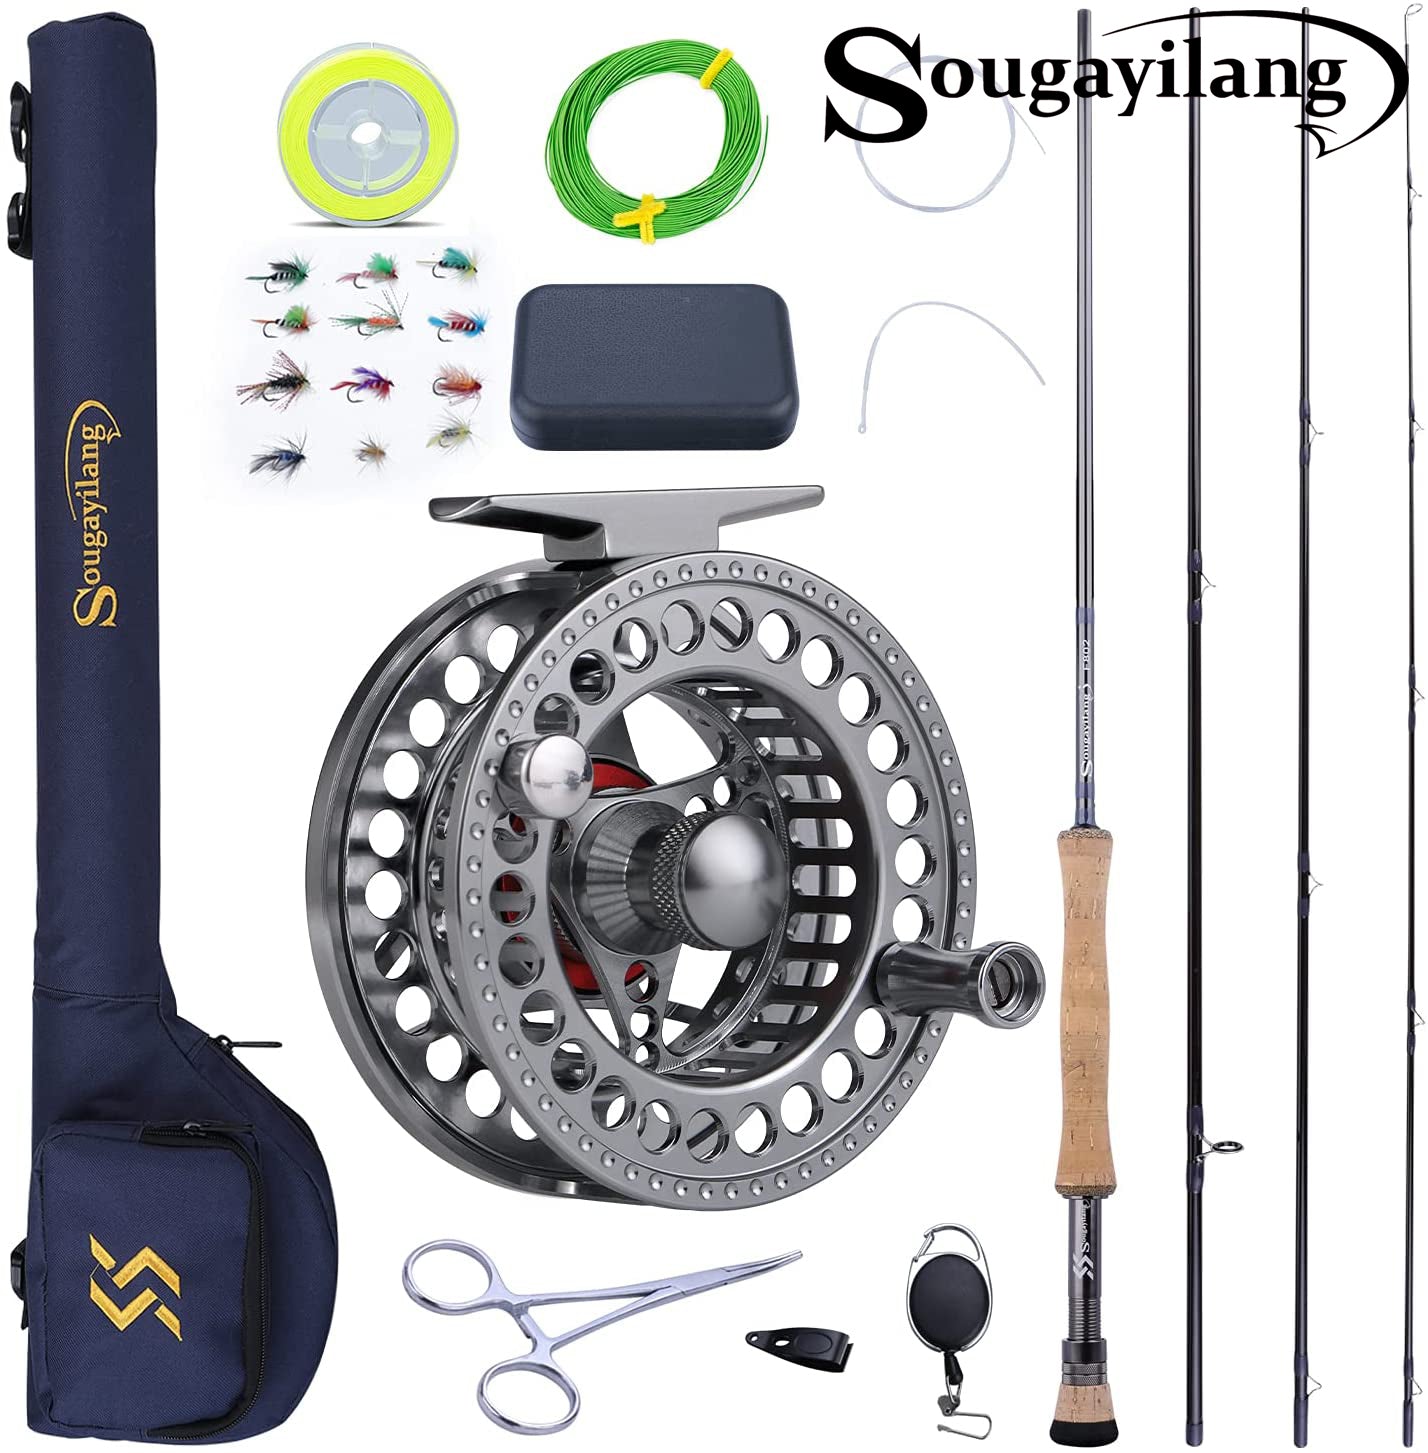 Sougayilang Saltwater Freshwater Fly Fishing Rod with Reel Combo